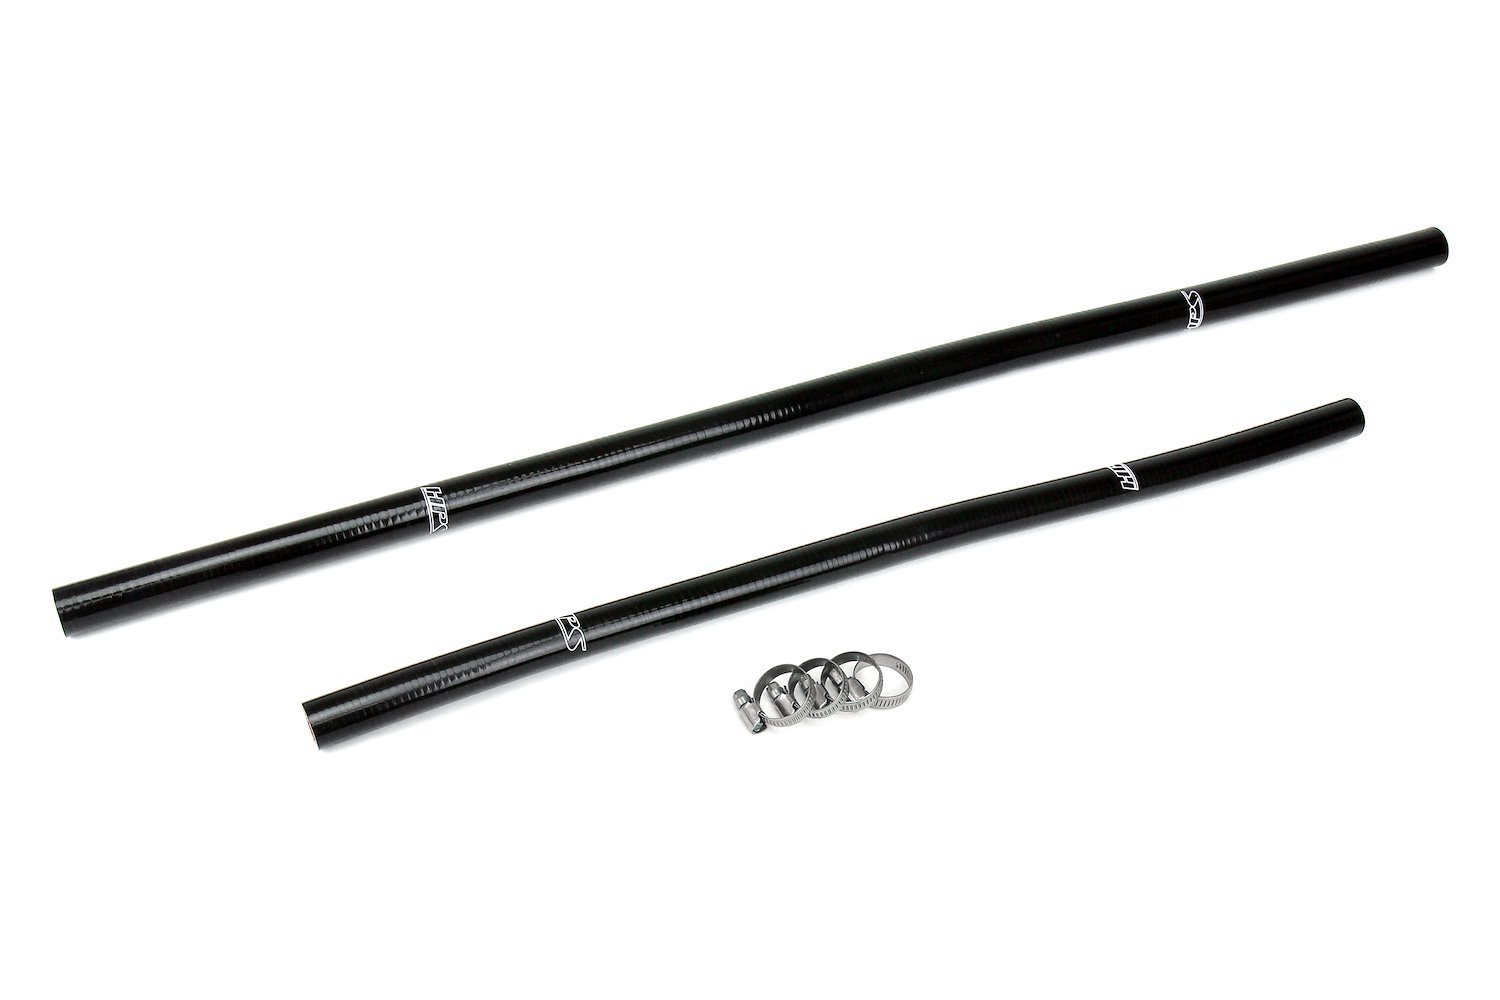 57-1910-BLK Heater Hose Kit, 3-Ply Reinforced Silicone, Replaces OEM Rubber Heater Coolant Hoses